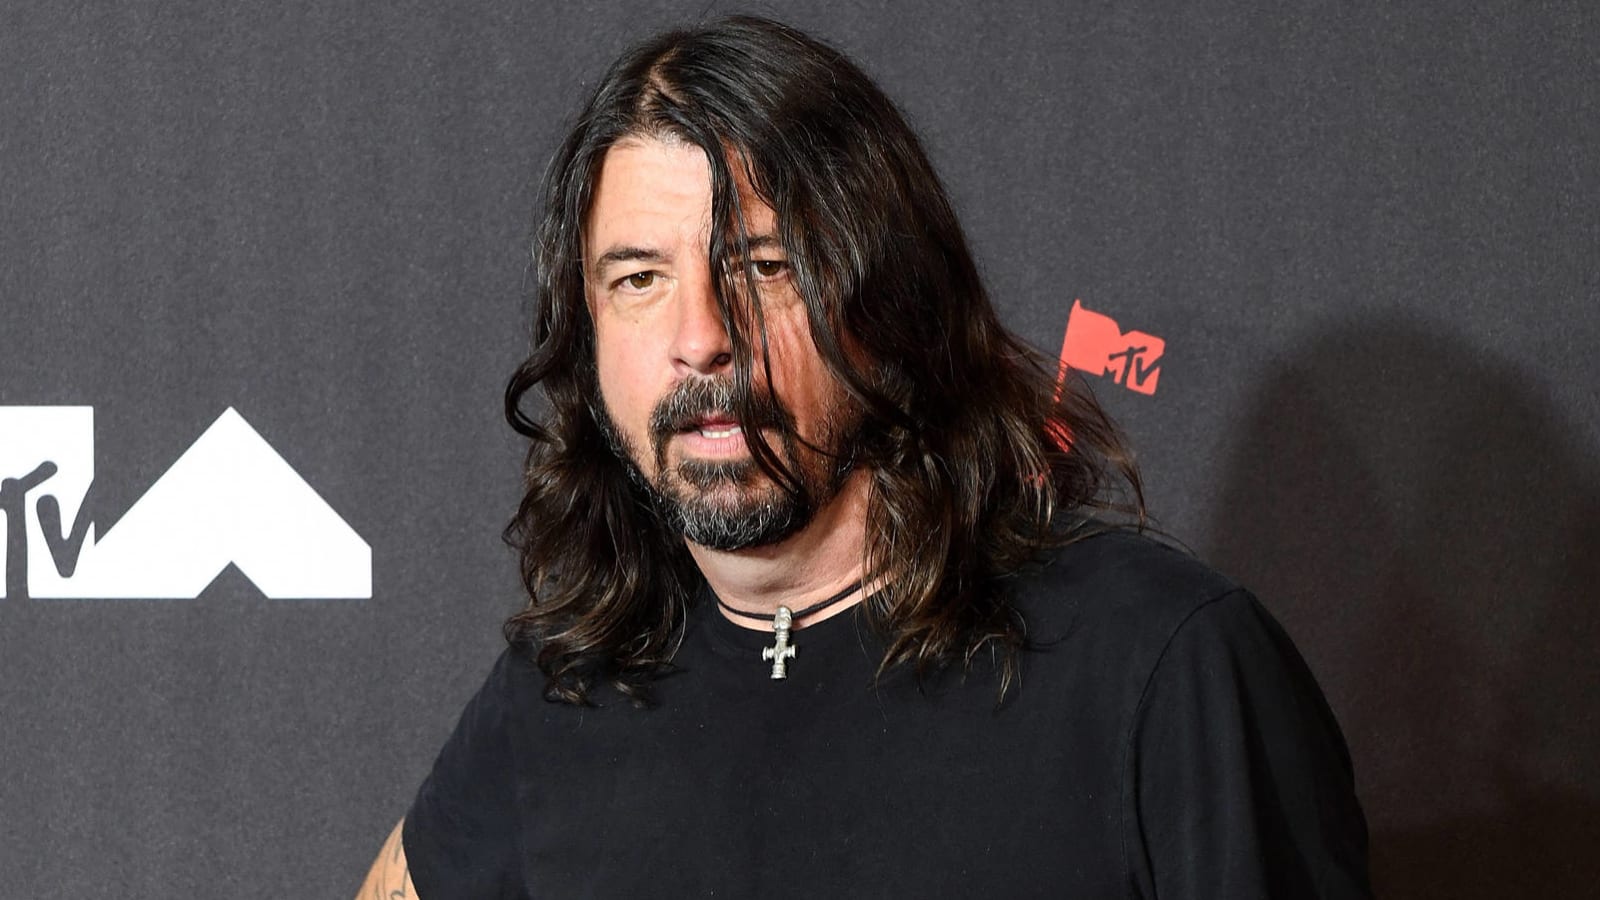 Foo Fighters announce 'STUDIO 666' horror comedy film, which 'they shot in secret'